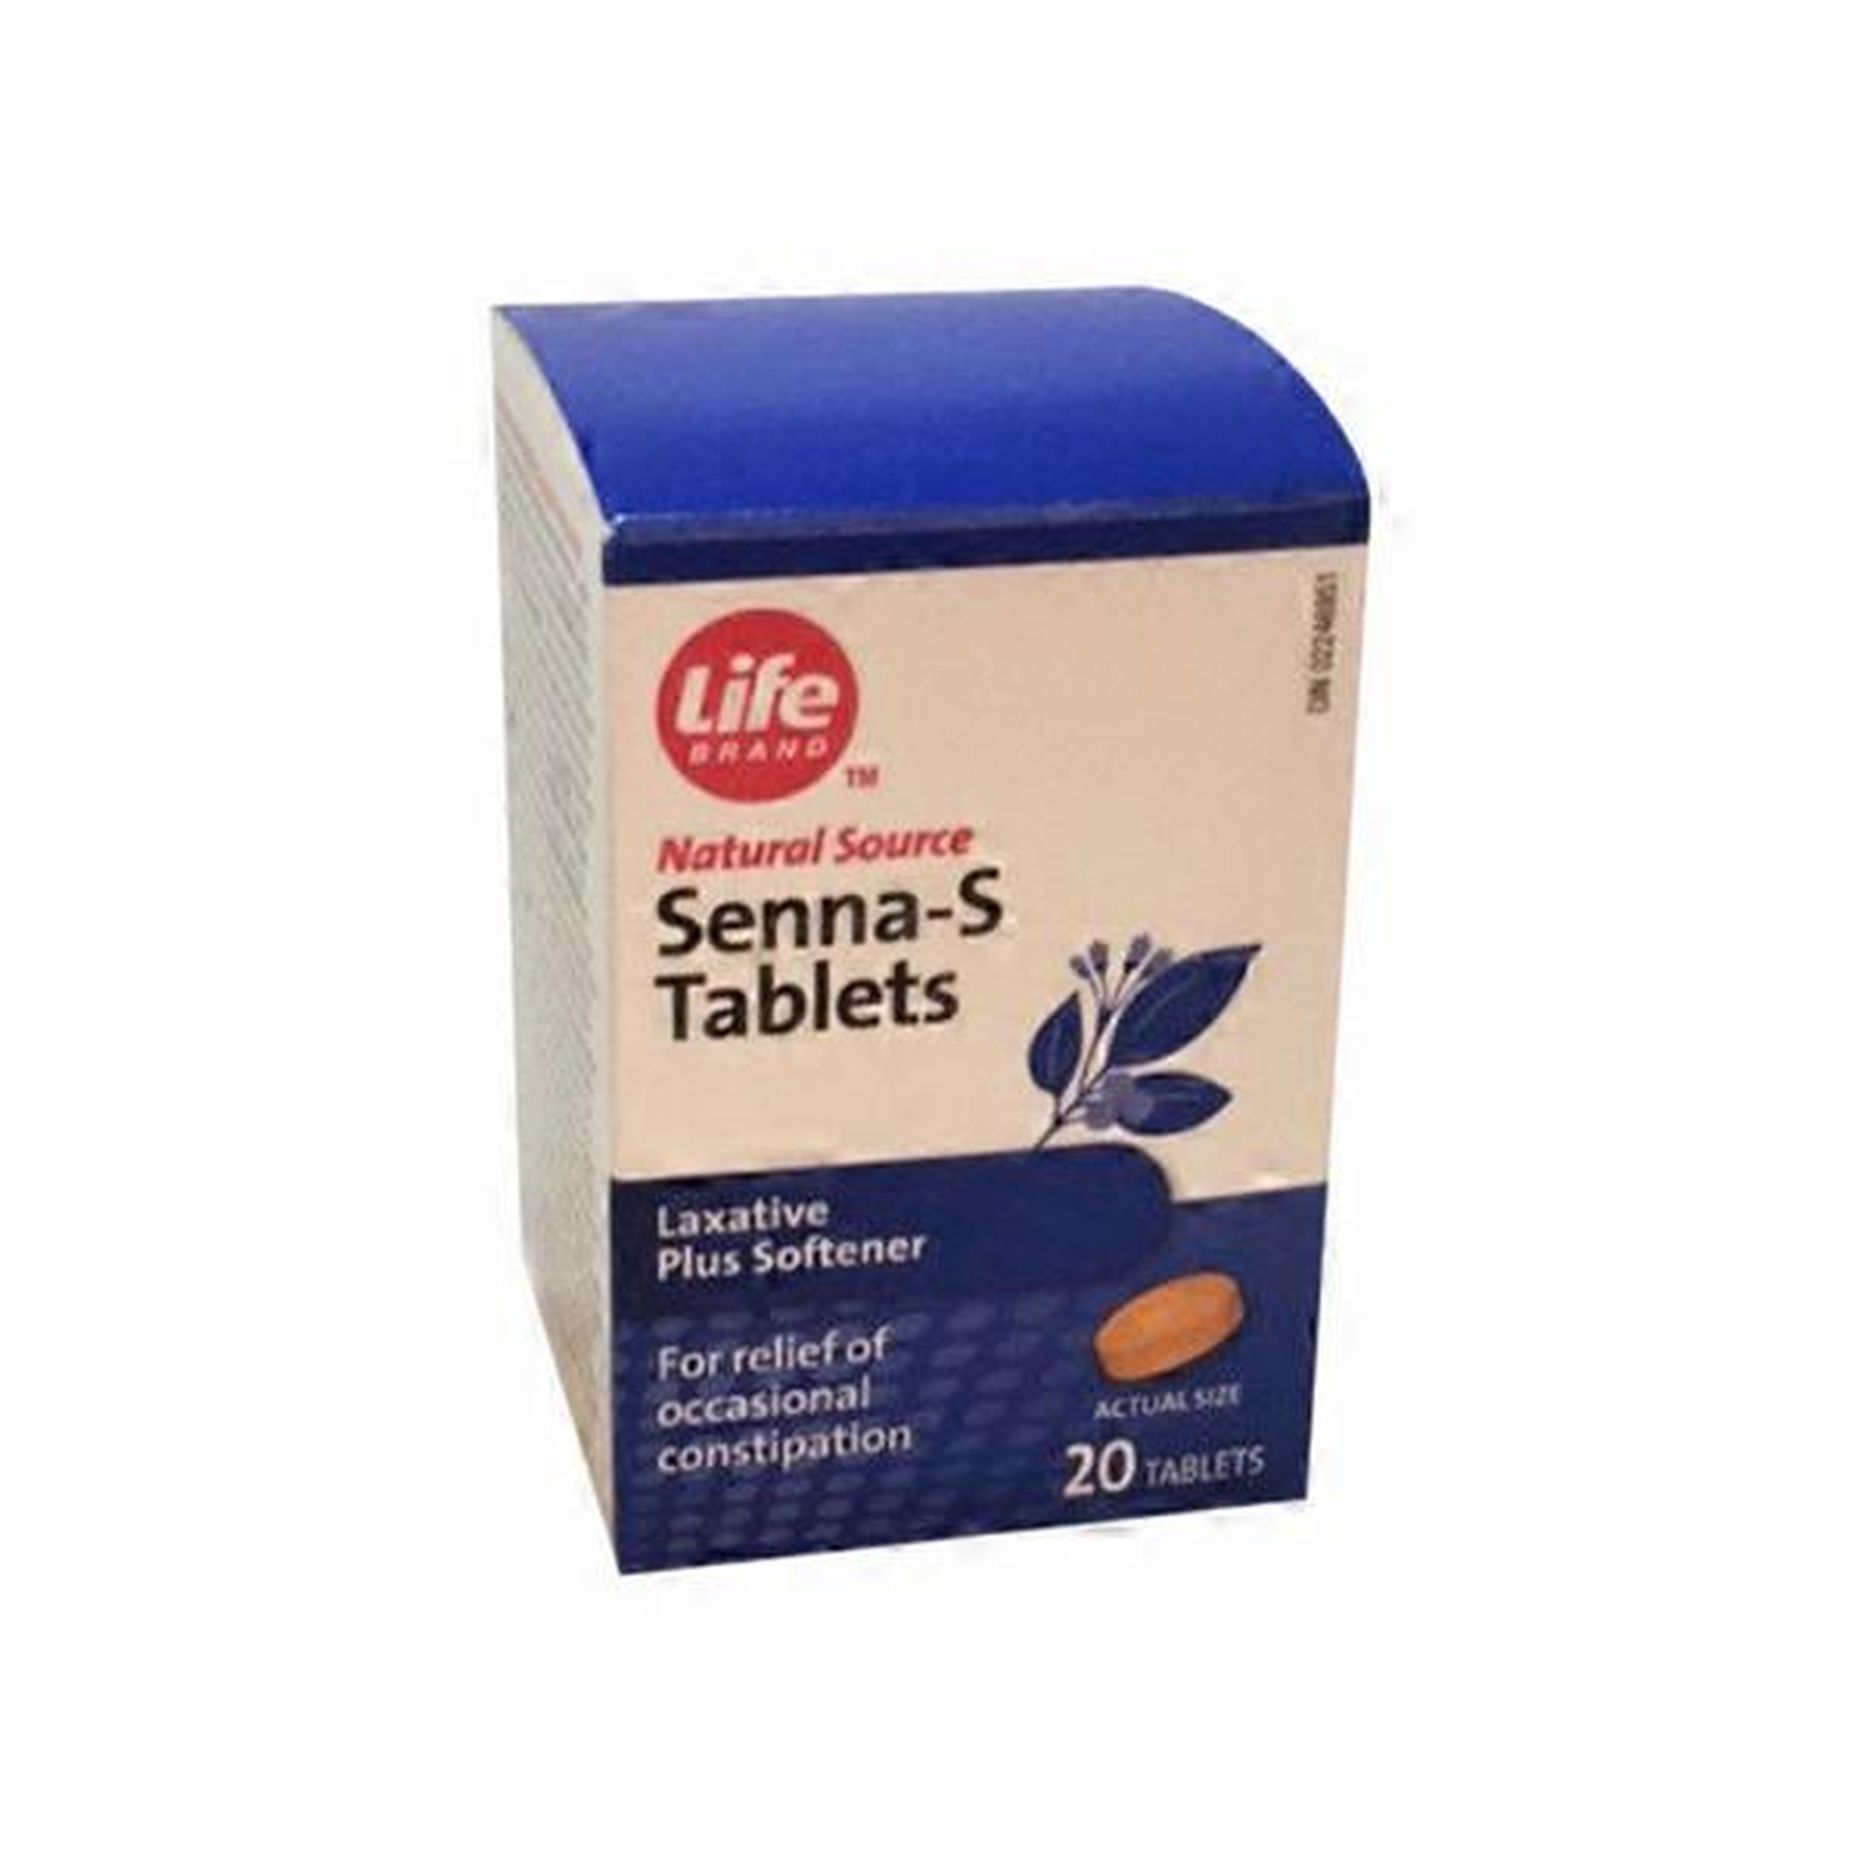 Life Brand Senna S Laxative Tablets 20 Ct Delivery Or Pickup Near Me Instacart